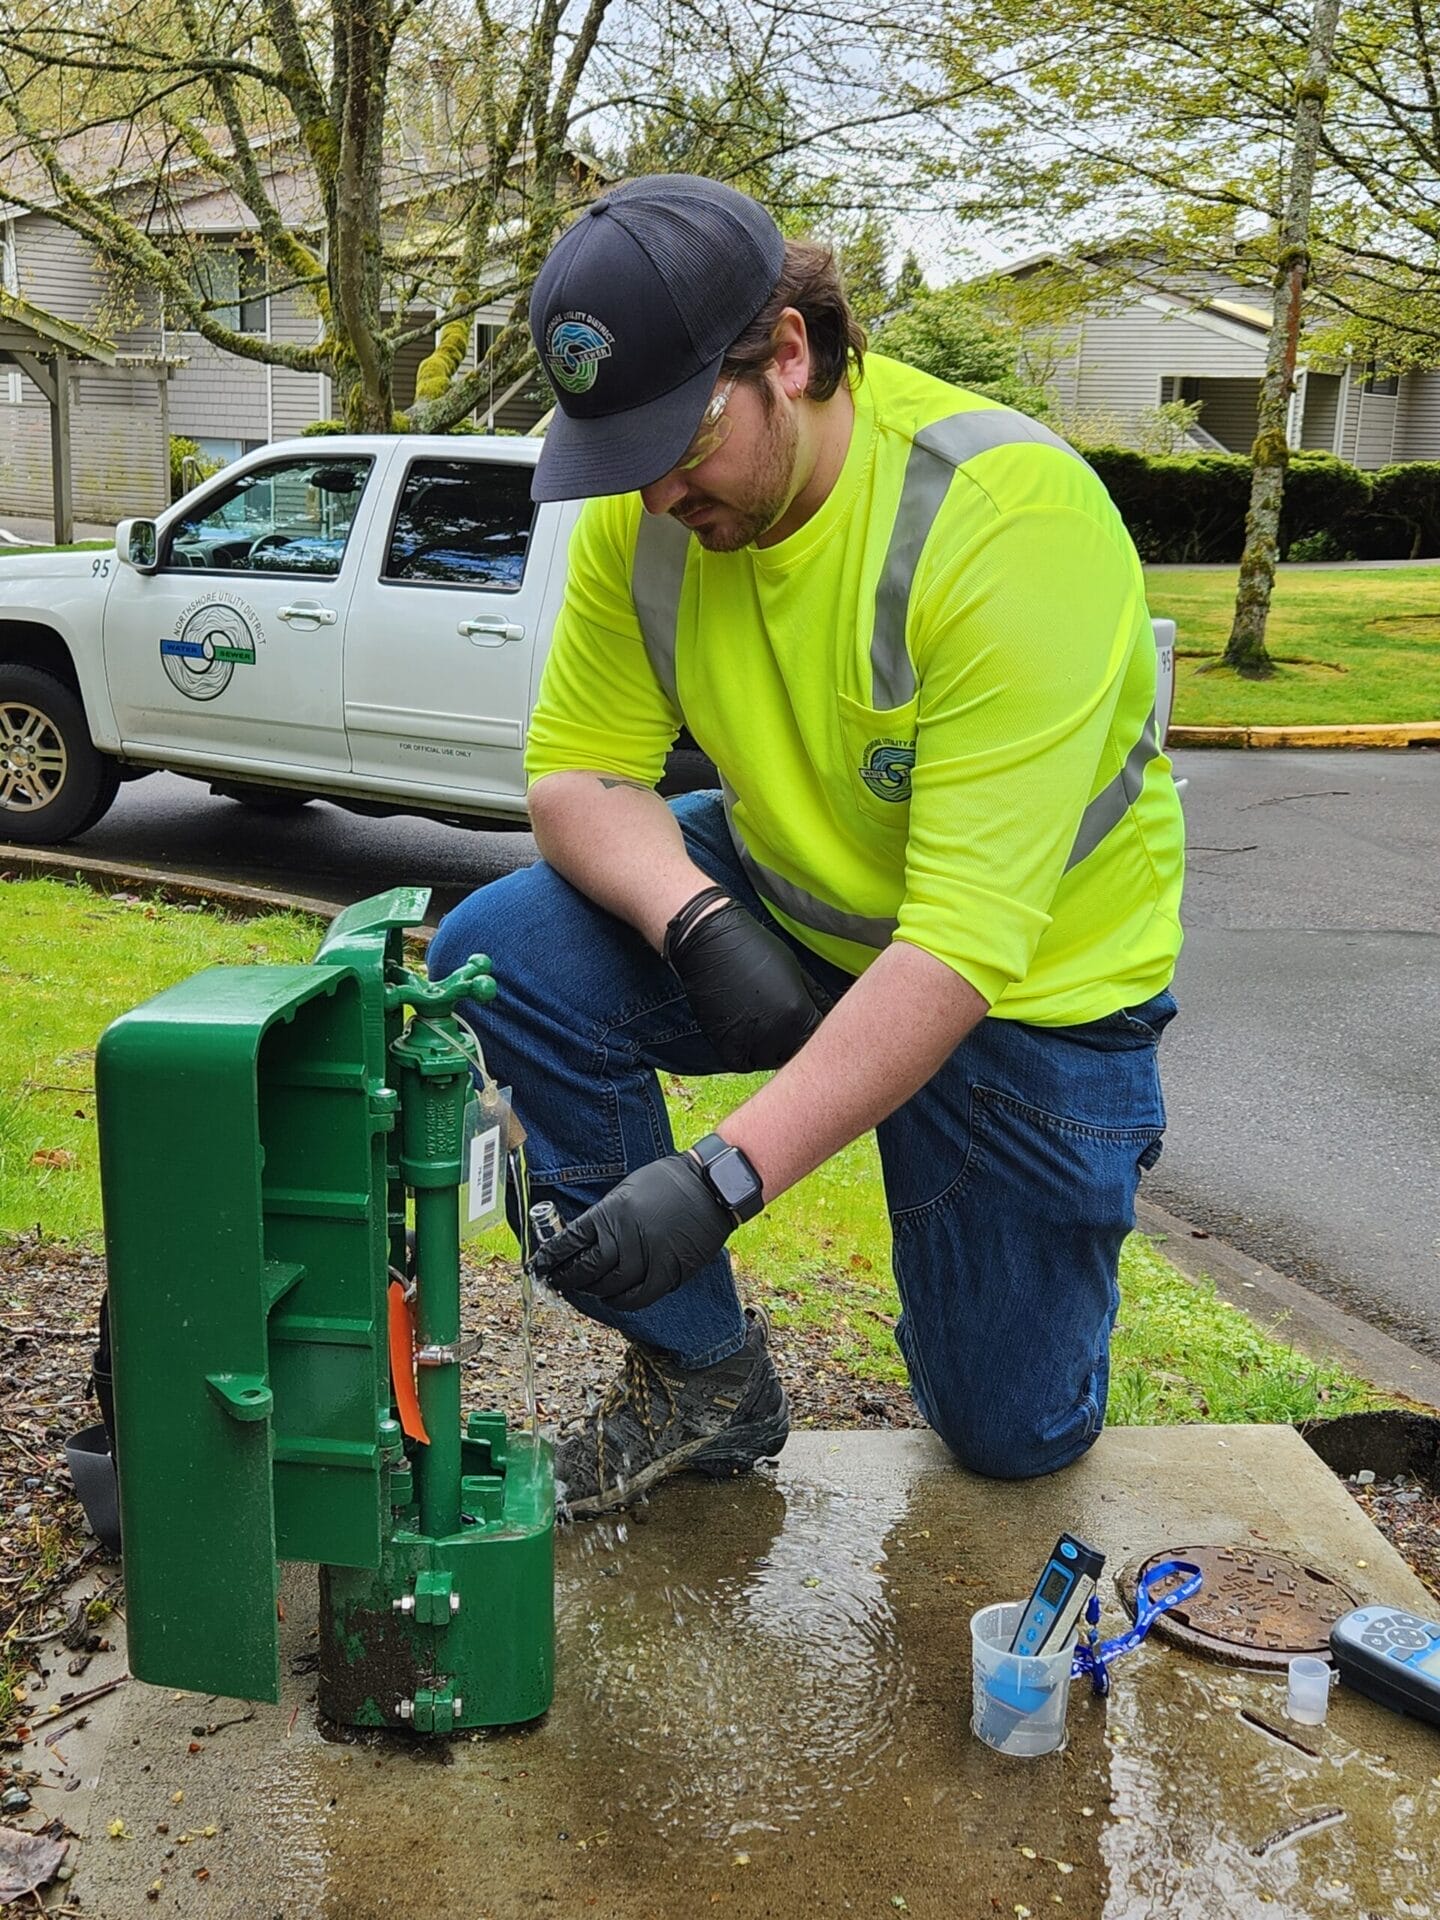 A worker in a neon yellow shirt and gloves kneels by a green utility box on a sidewalk, preparing a water testing sample. A white truck is parked nearby.